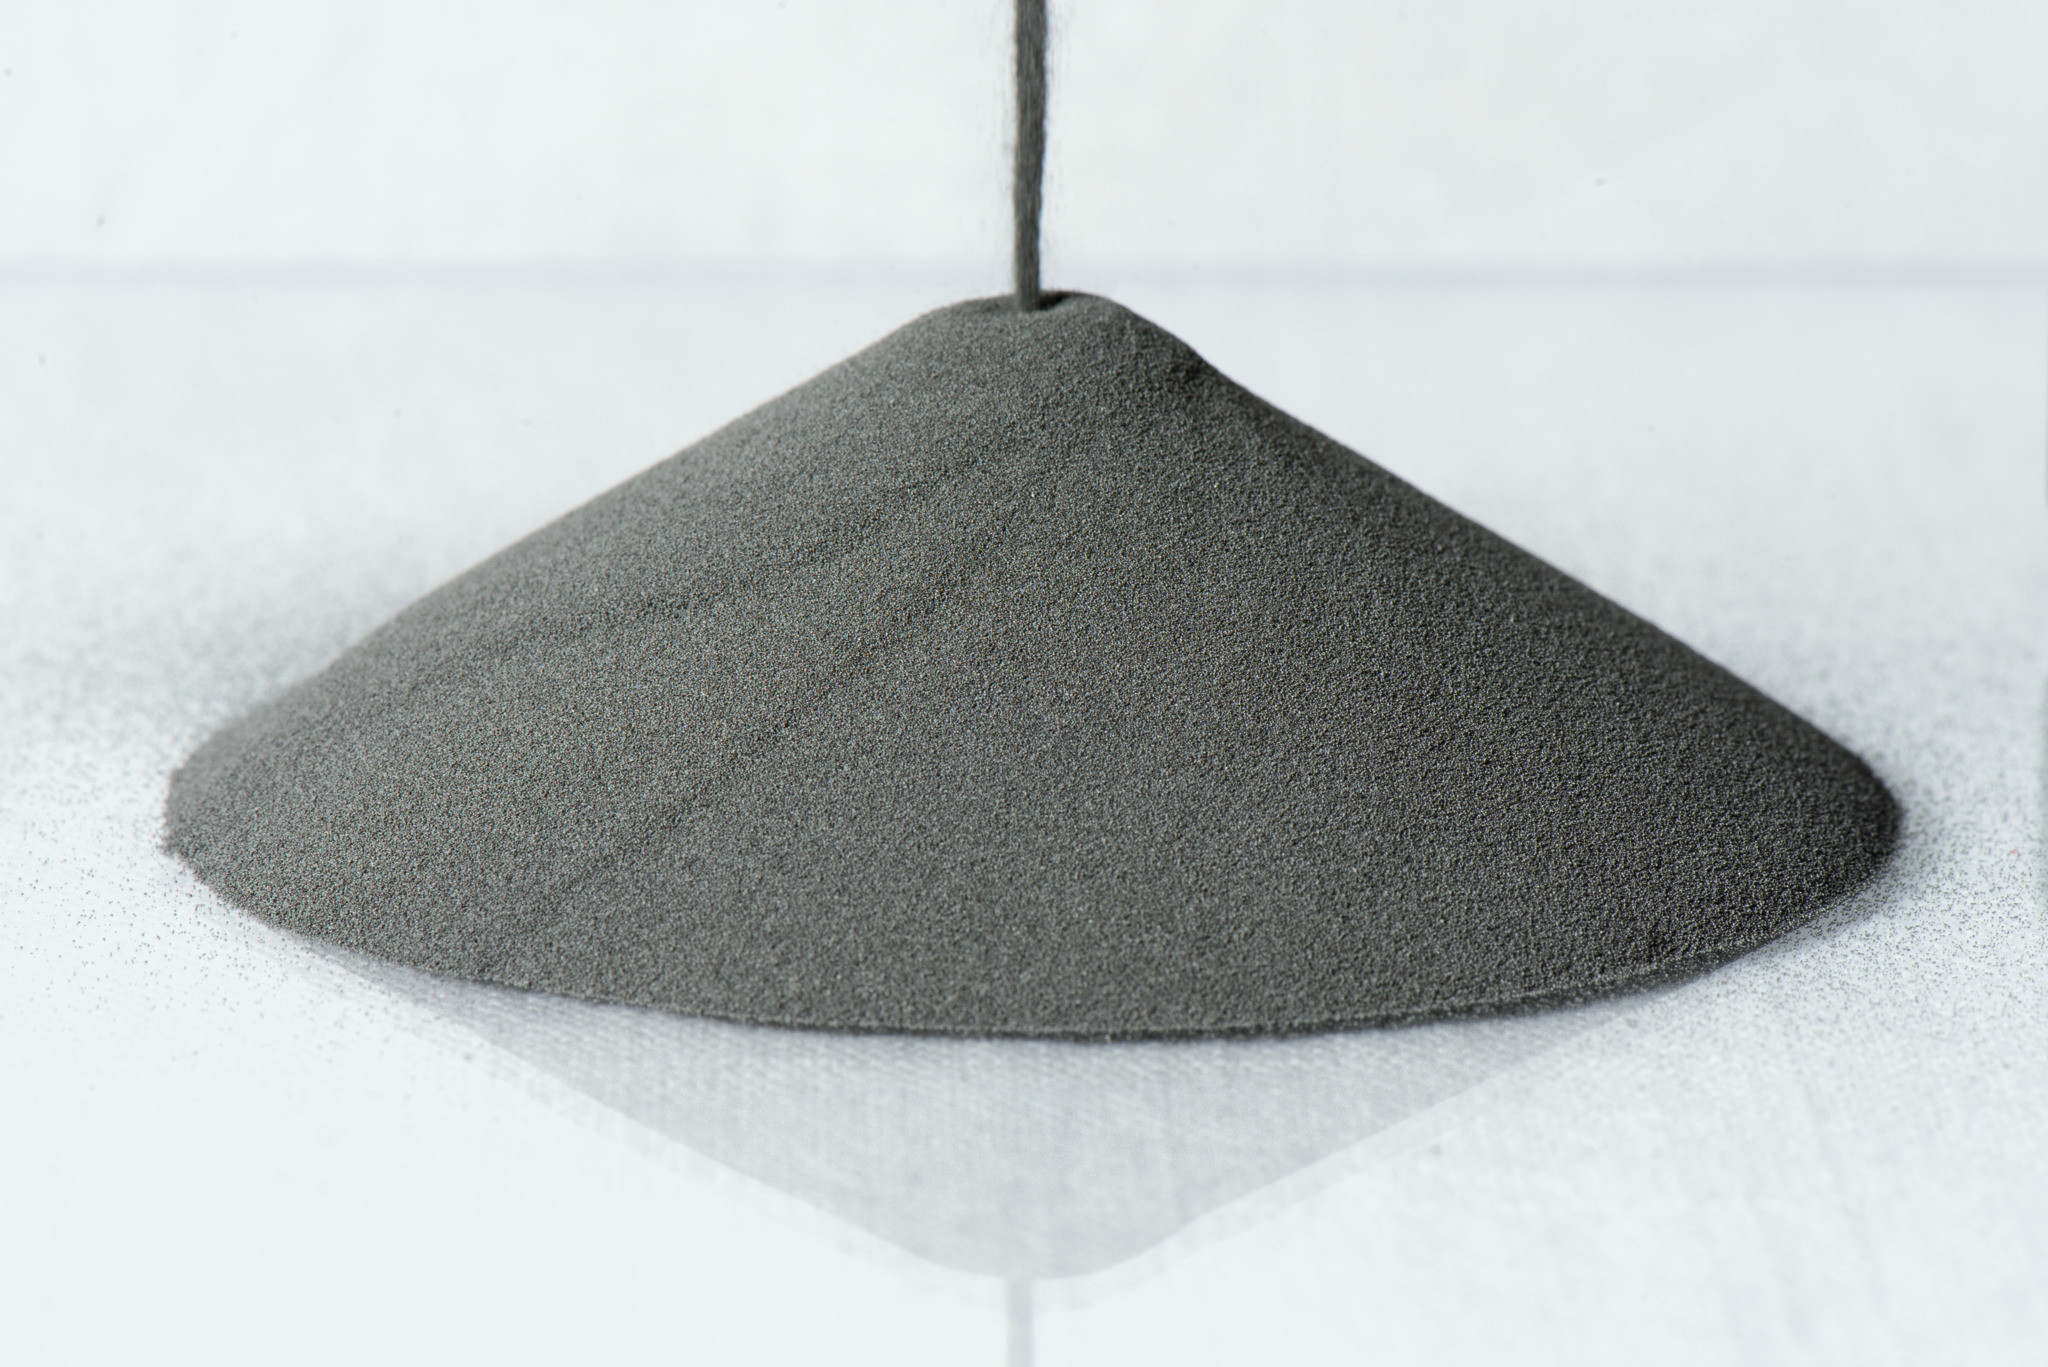 Linde's new laboratory will enable advanced research into the manufacture of metal powders for 3D printing. Image via Linde.